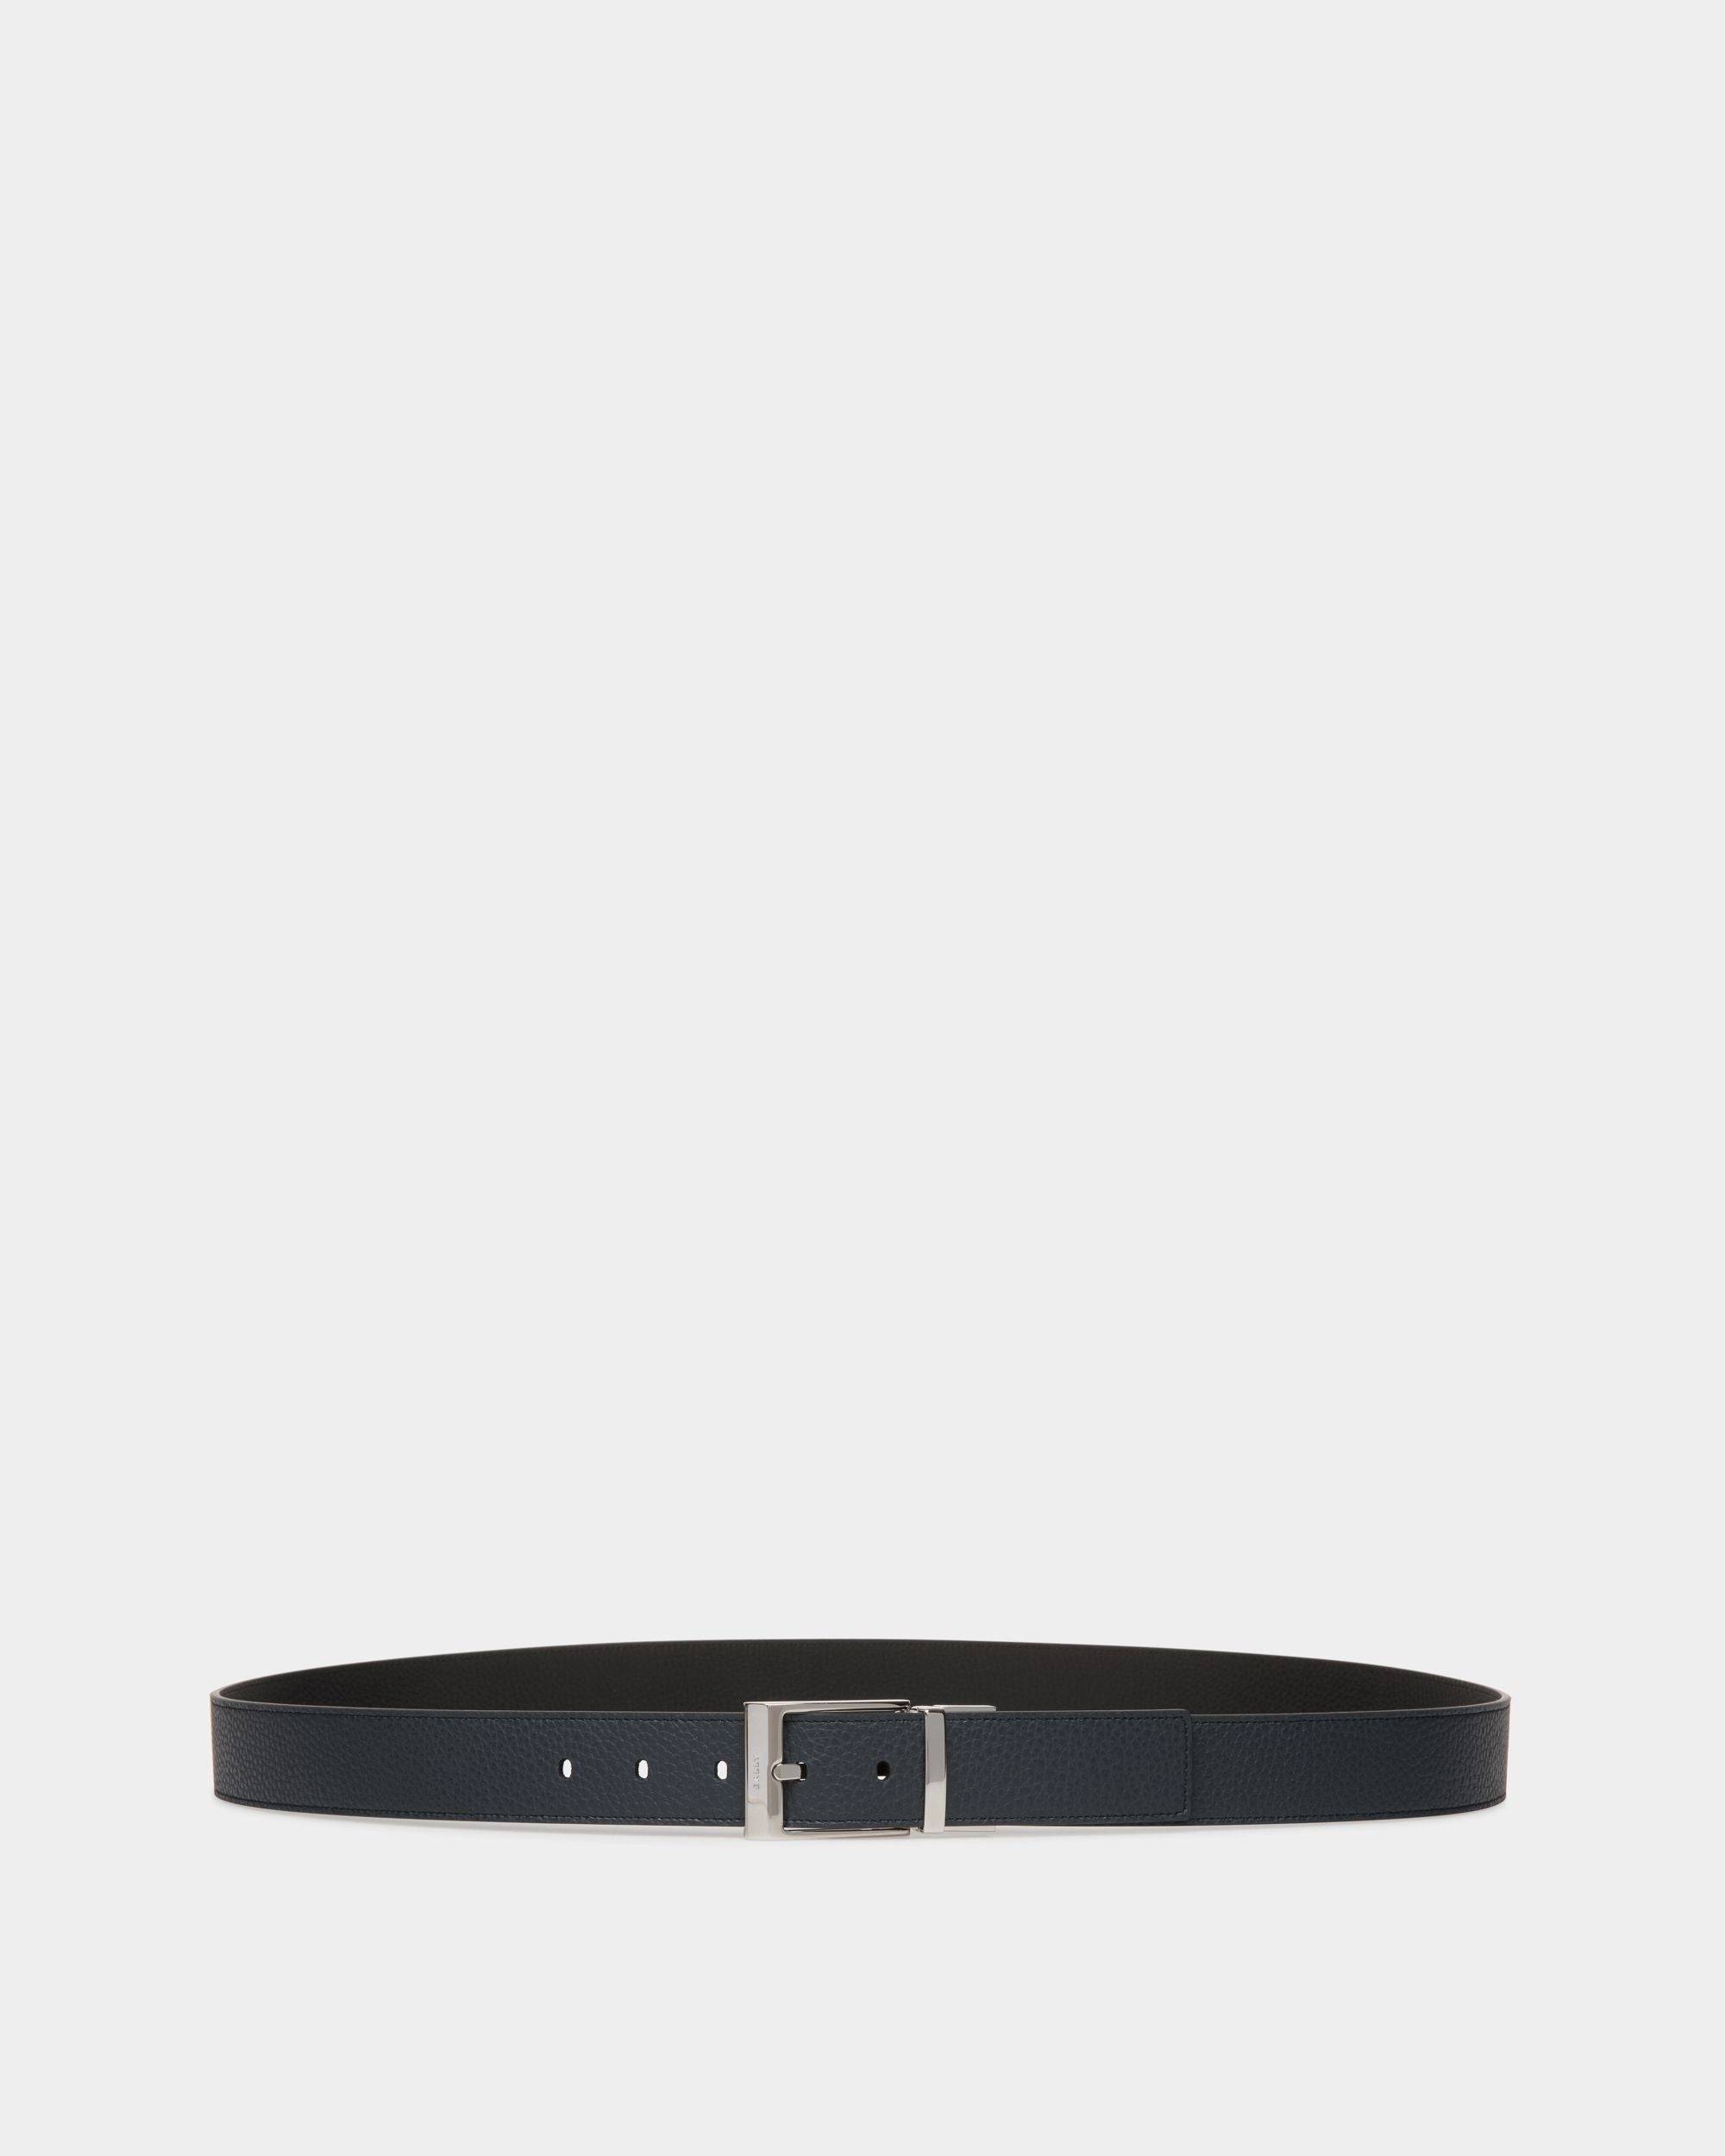 Shiffie 35mm Reversible And Adjustable Belt in Navy Blue And Black Leather - Men's - Bally - 01